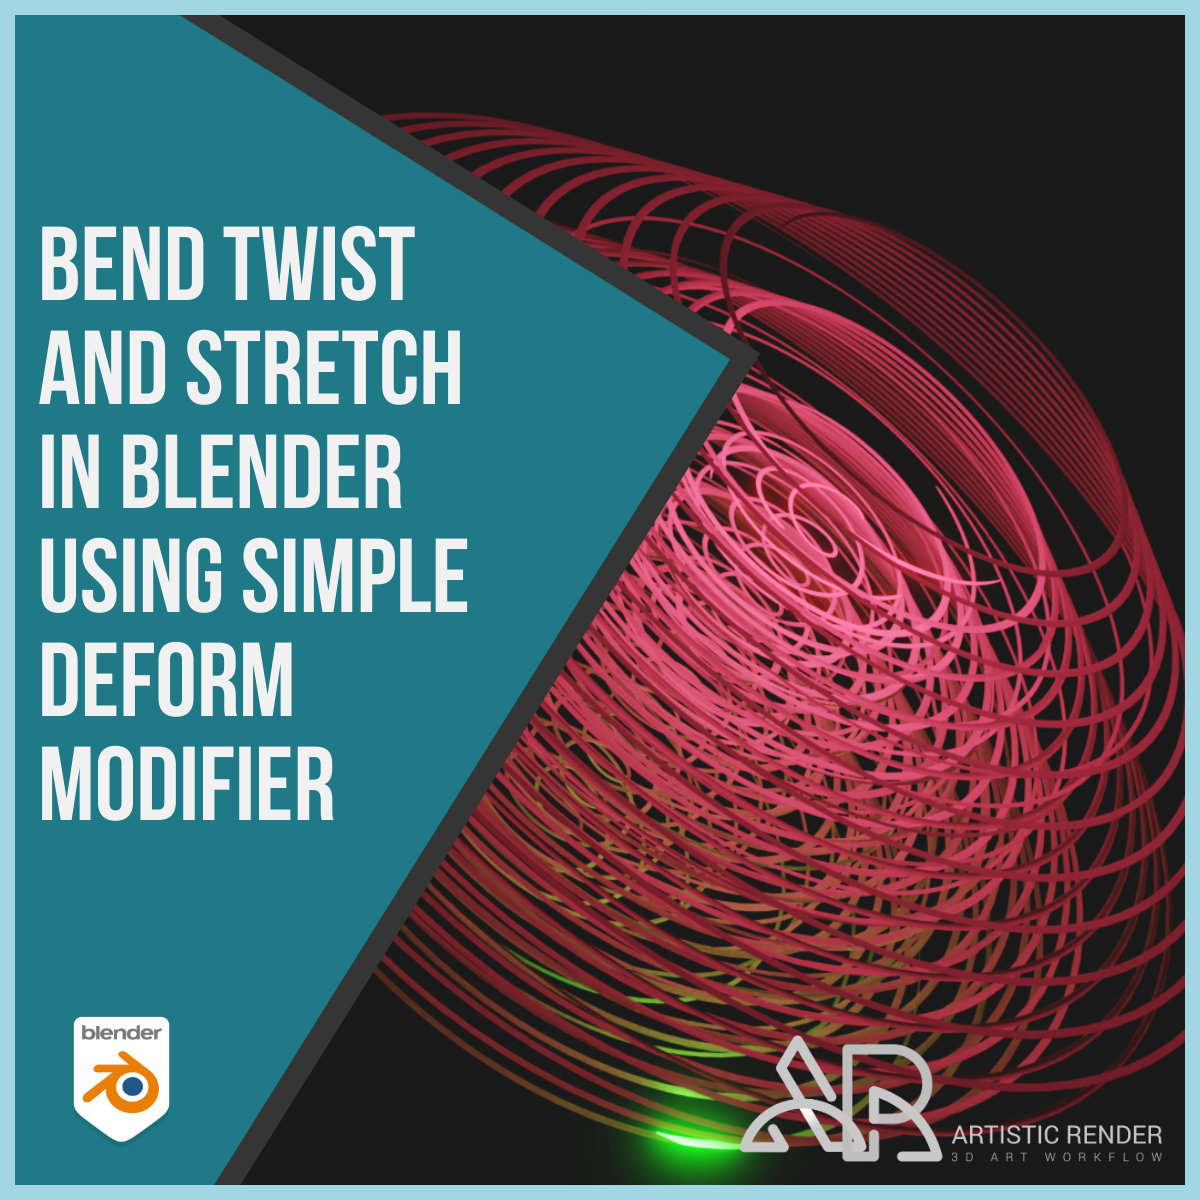 Bend twist and stretch objects Blender using simple deform modifier - Artisticrender.com